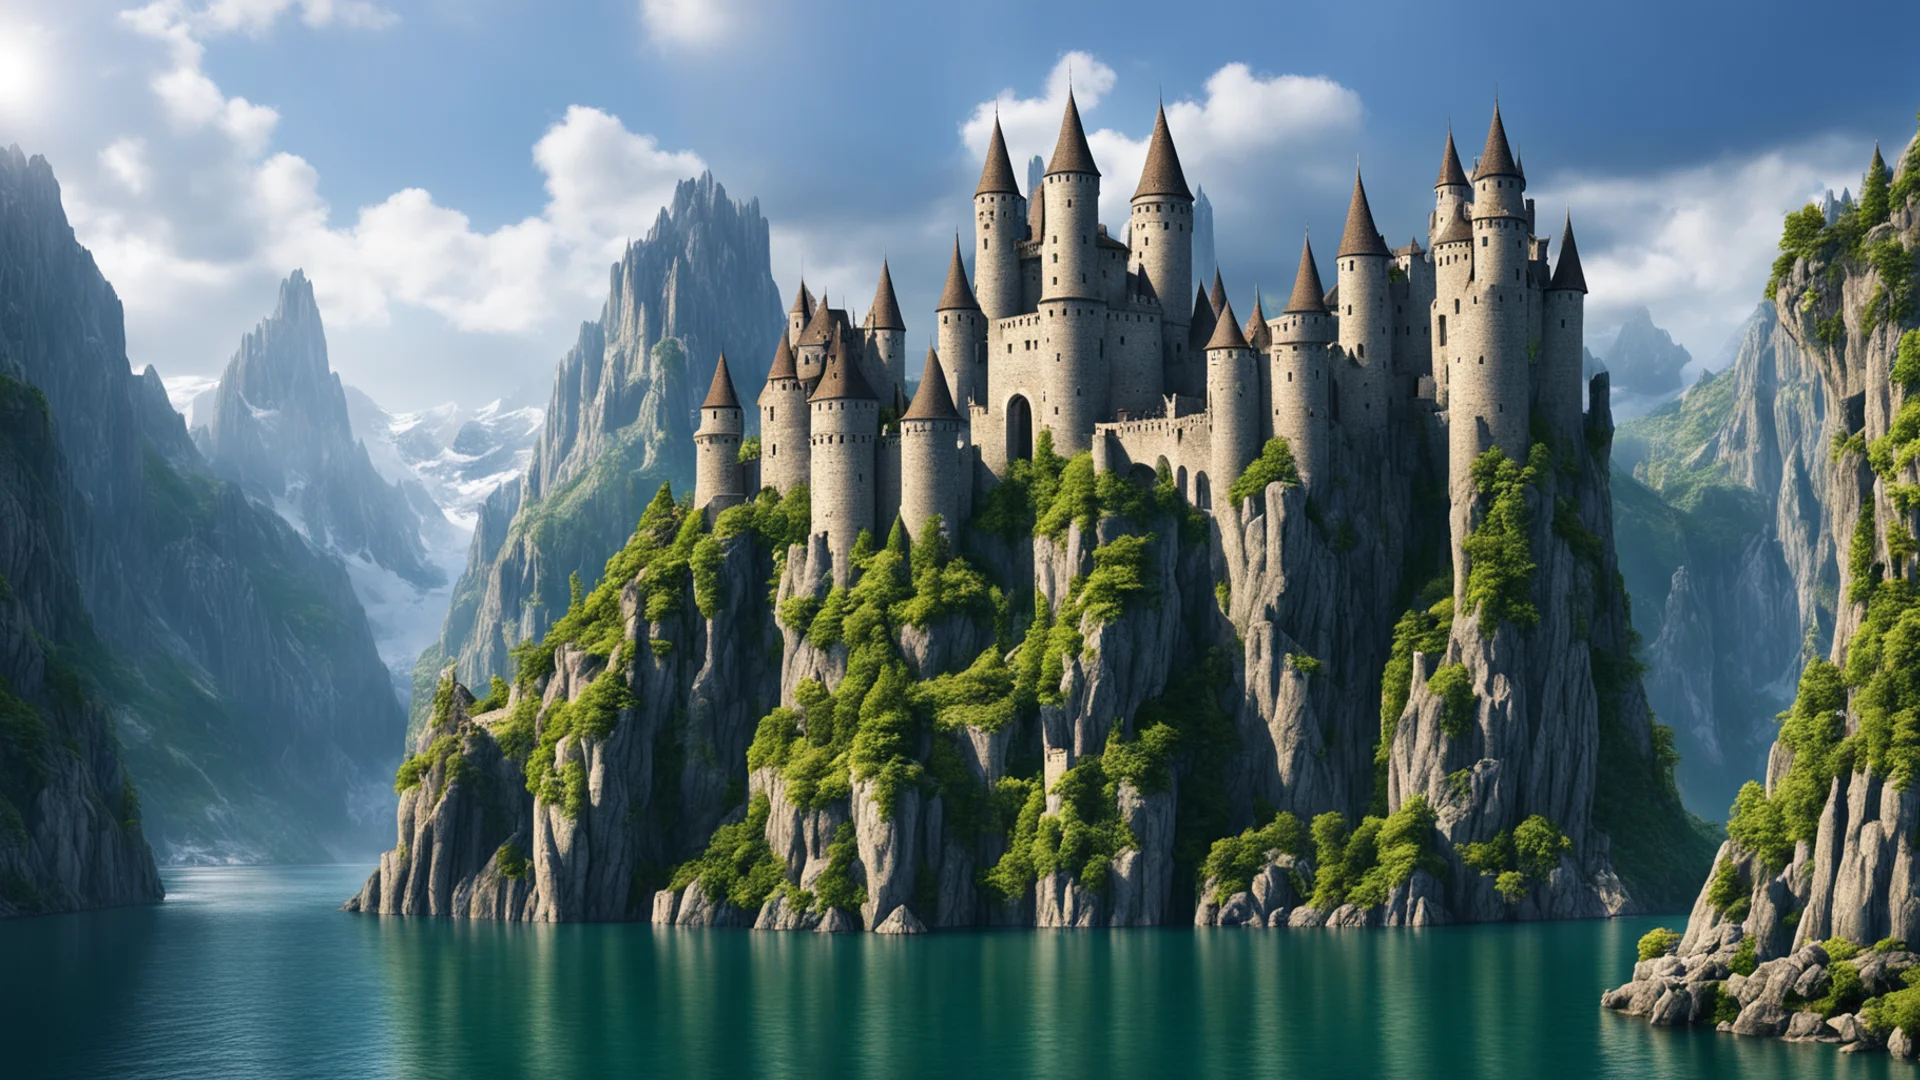 epic cliffs castle over lake large spiraling towers on castle epic shot realistic unreal trending amazing awesome portrait 2 wide